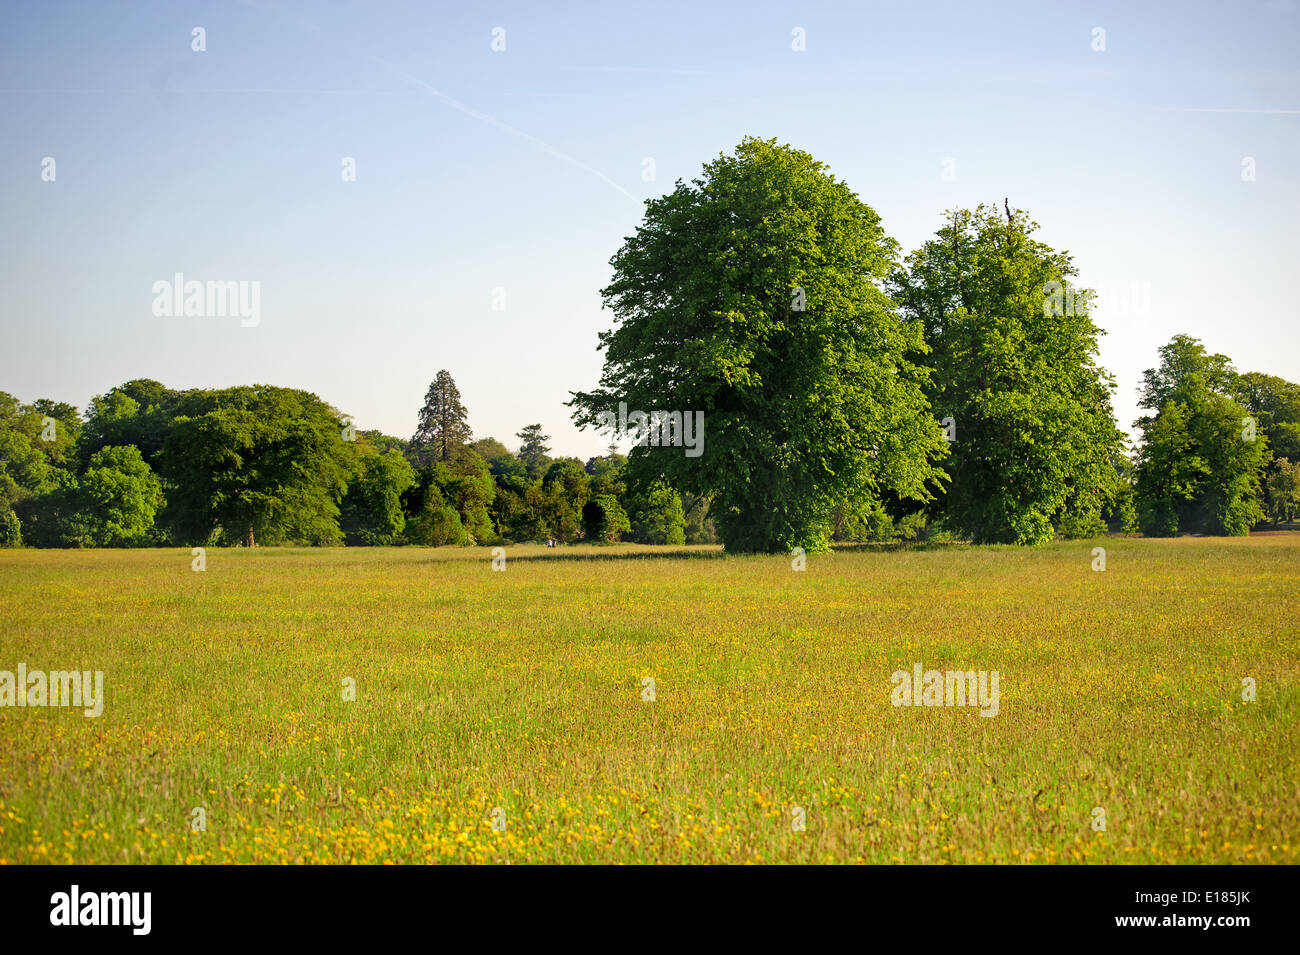 Midday summer rural landscape meadow and foliage trees Stock Photo